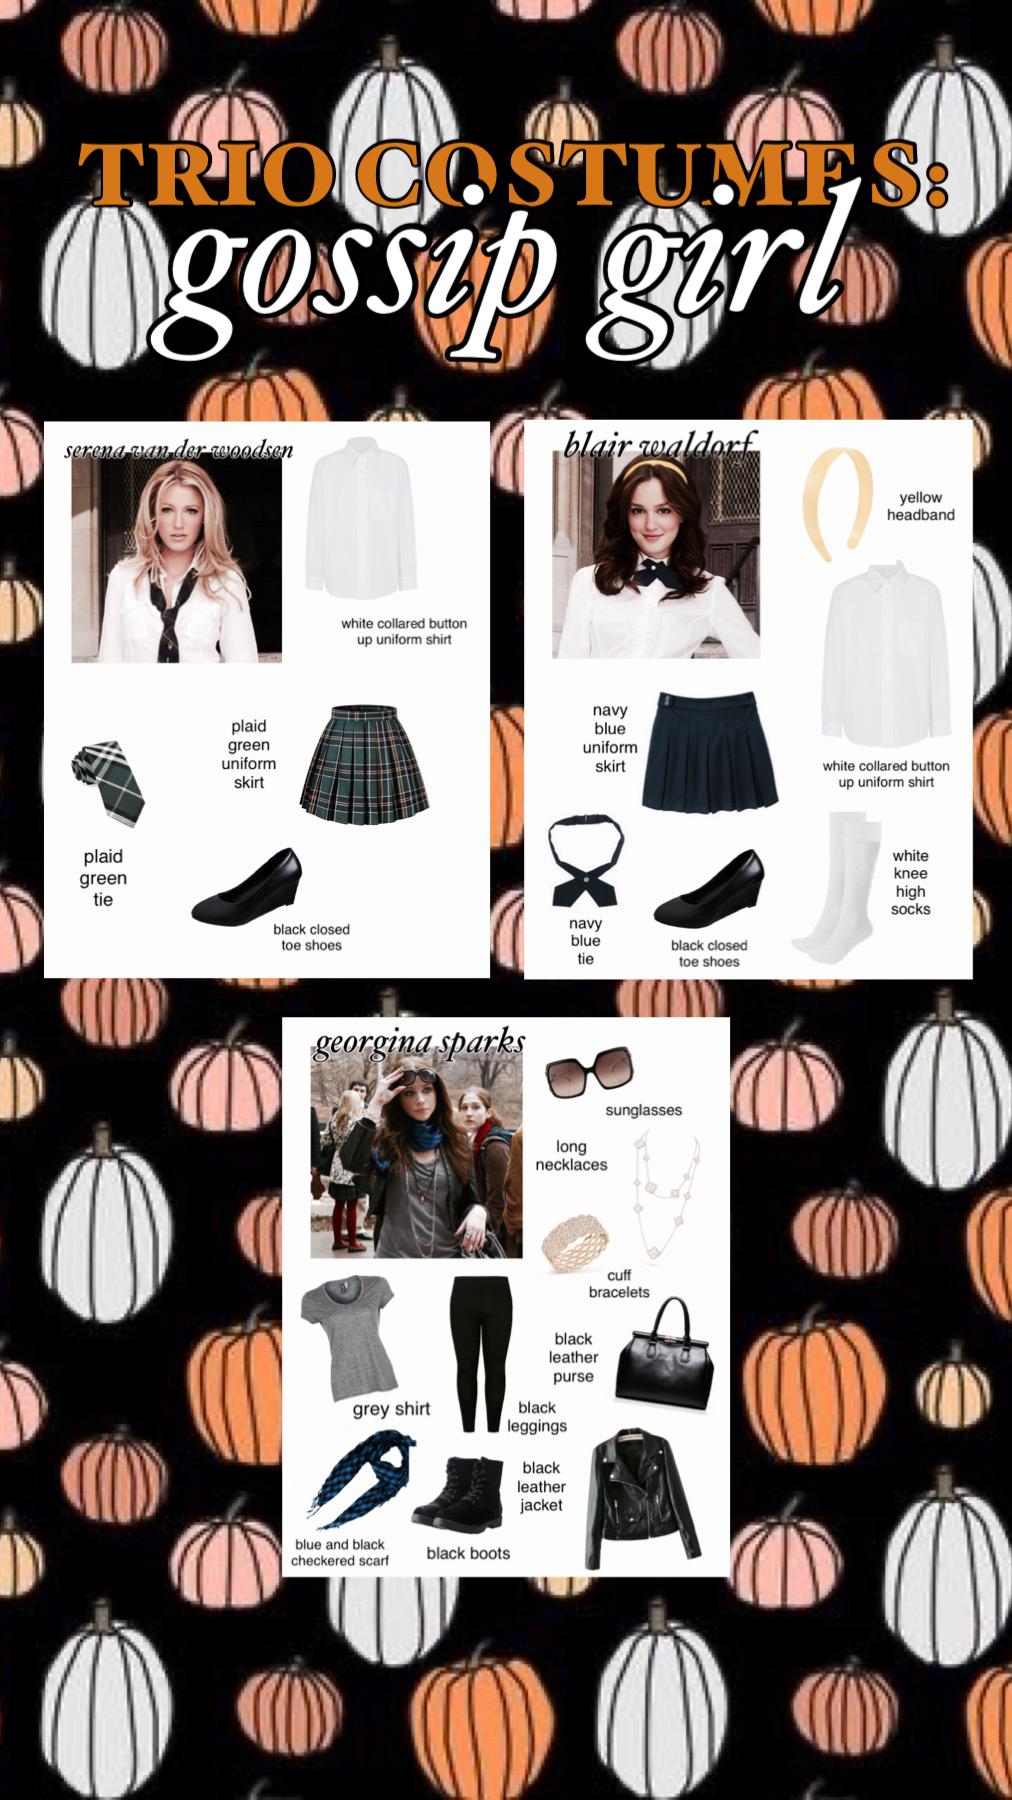 🌟 GOSSIP GIRL 🌟
Grab your two best friends and recreate the iconic looks of Serena, Blair, and Georgina! If looking to add more people, costumes can be created for Jenny, Vanessa, or even Chuck and Nate!
